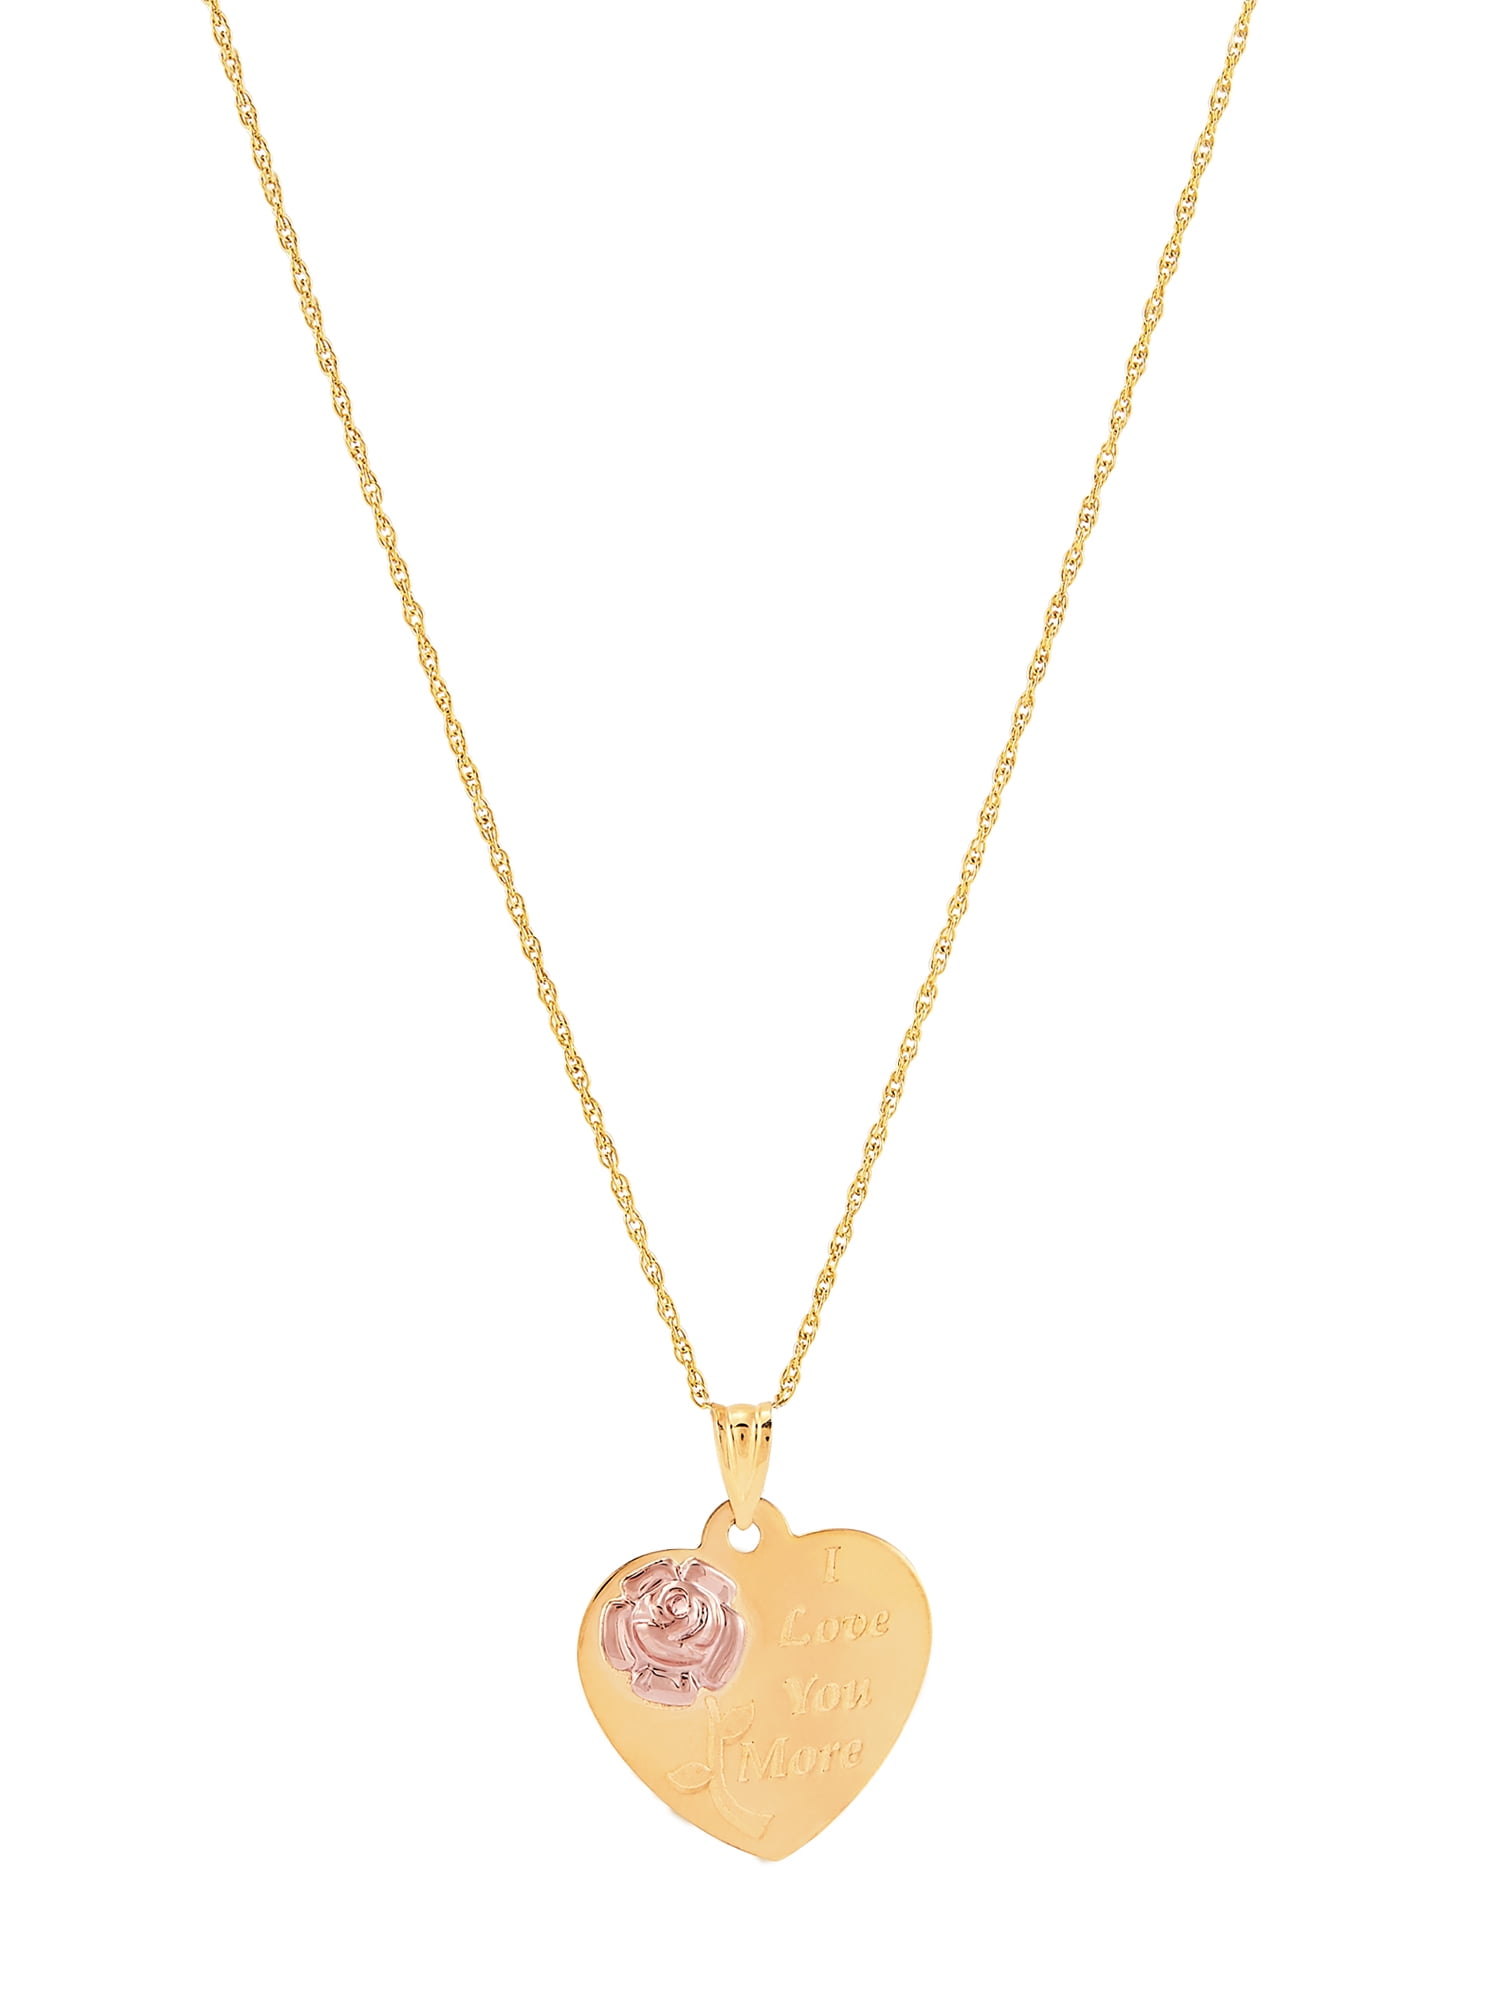 10k Yellow Gold Mom Heart Pendant Charm Necklace Special Person Fine Jewelry 